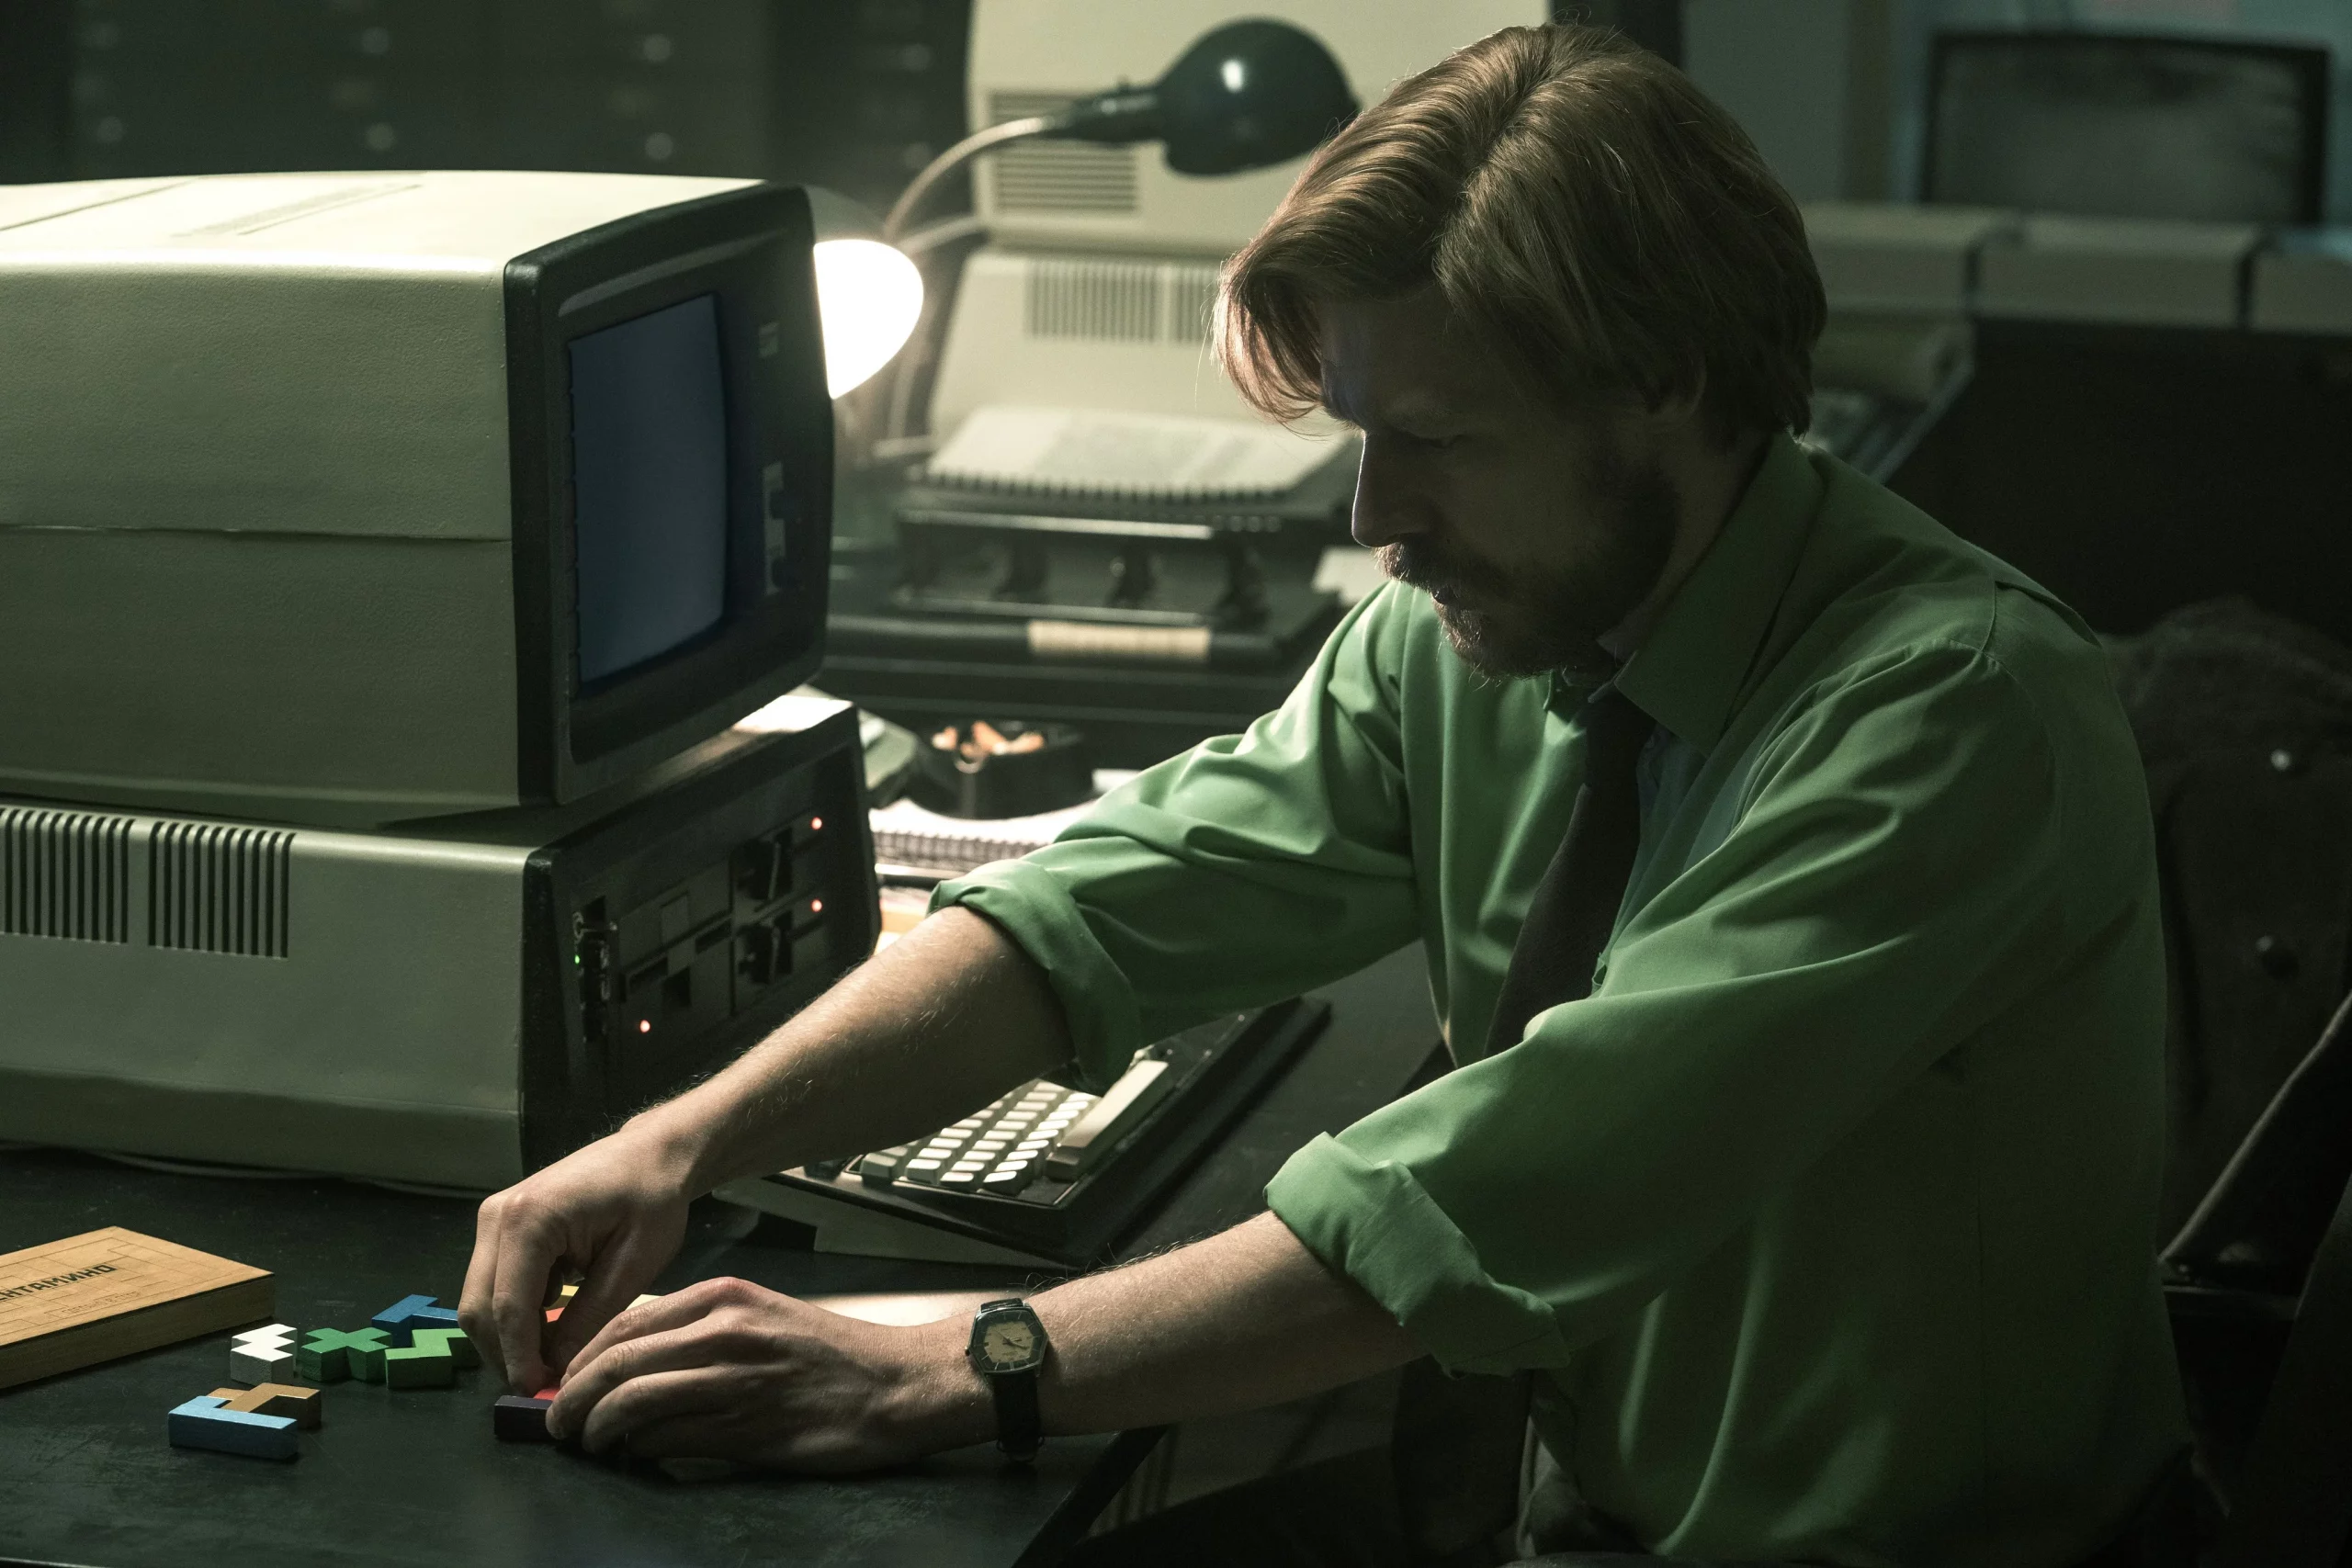 A man sits in a dimly lit office next to an old computer. It's the '80s. He is moving tetriminoes around on a desk.